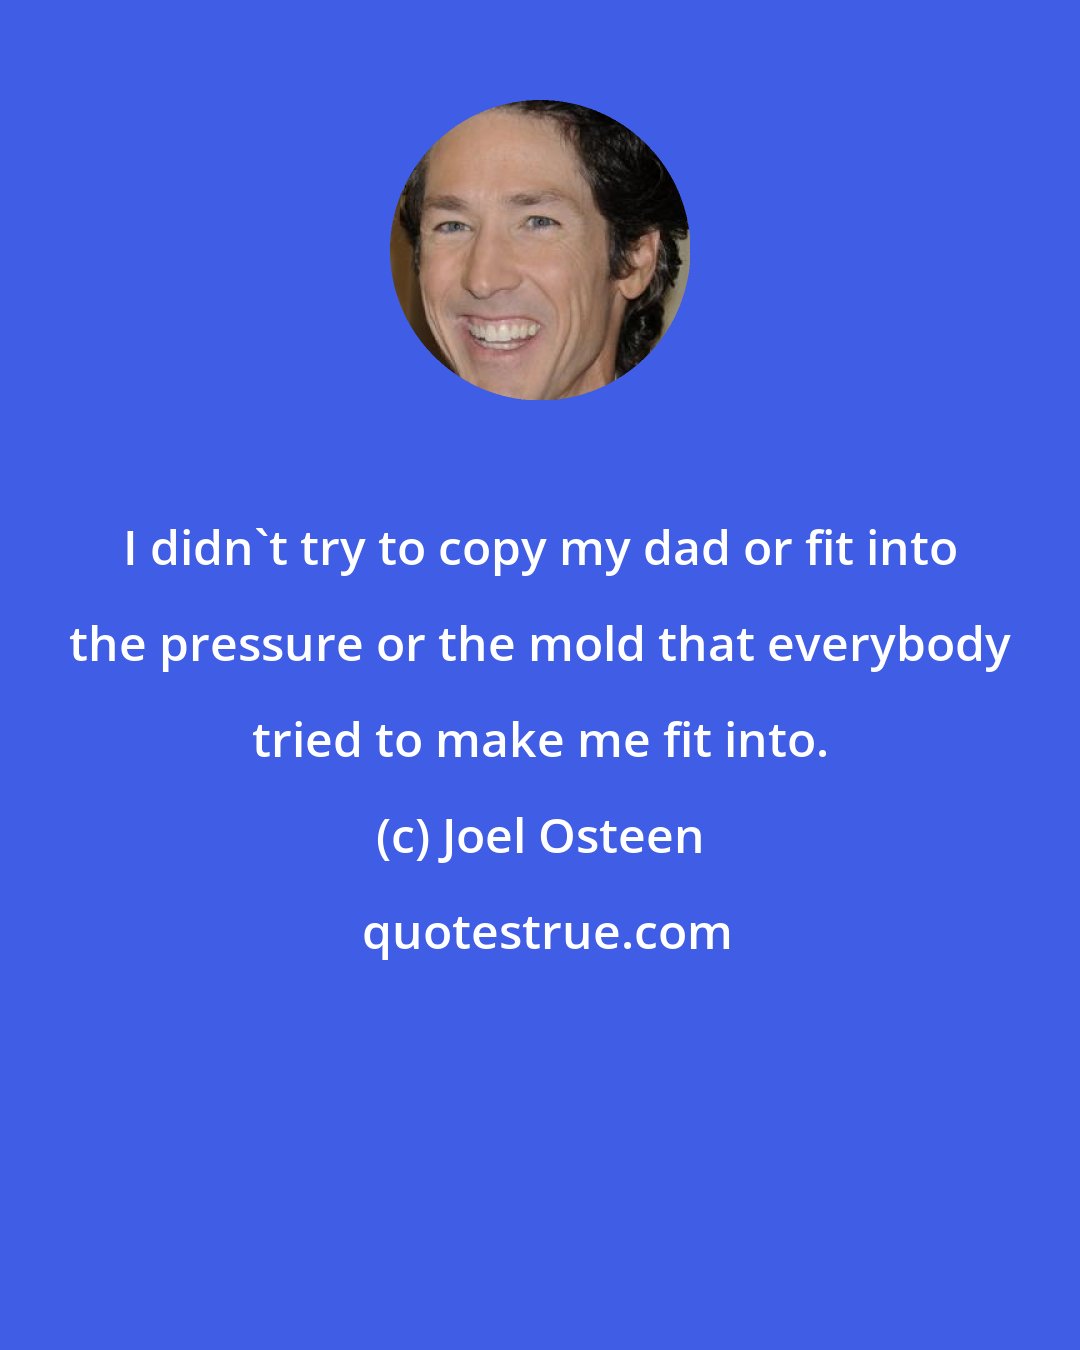 Joel Osteen: I didn't try to copy my dad or fit into the pressure or the mold that everybody tried to make me fit into.